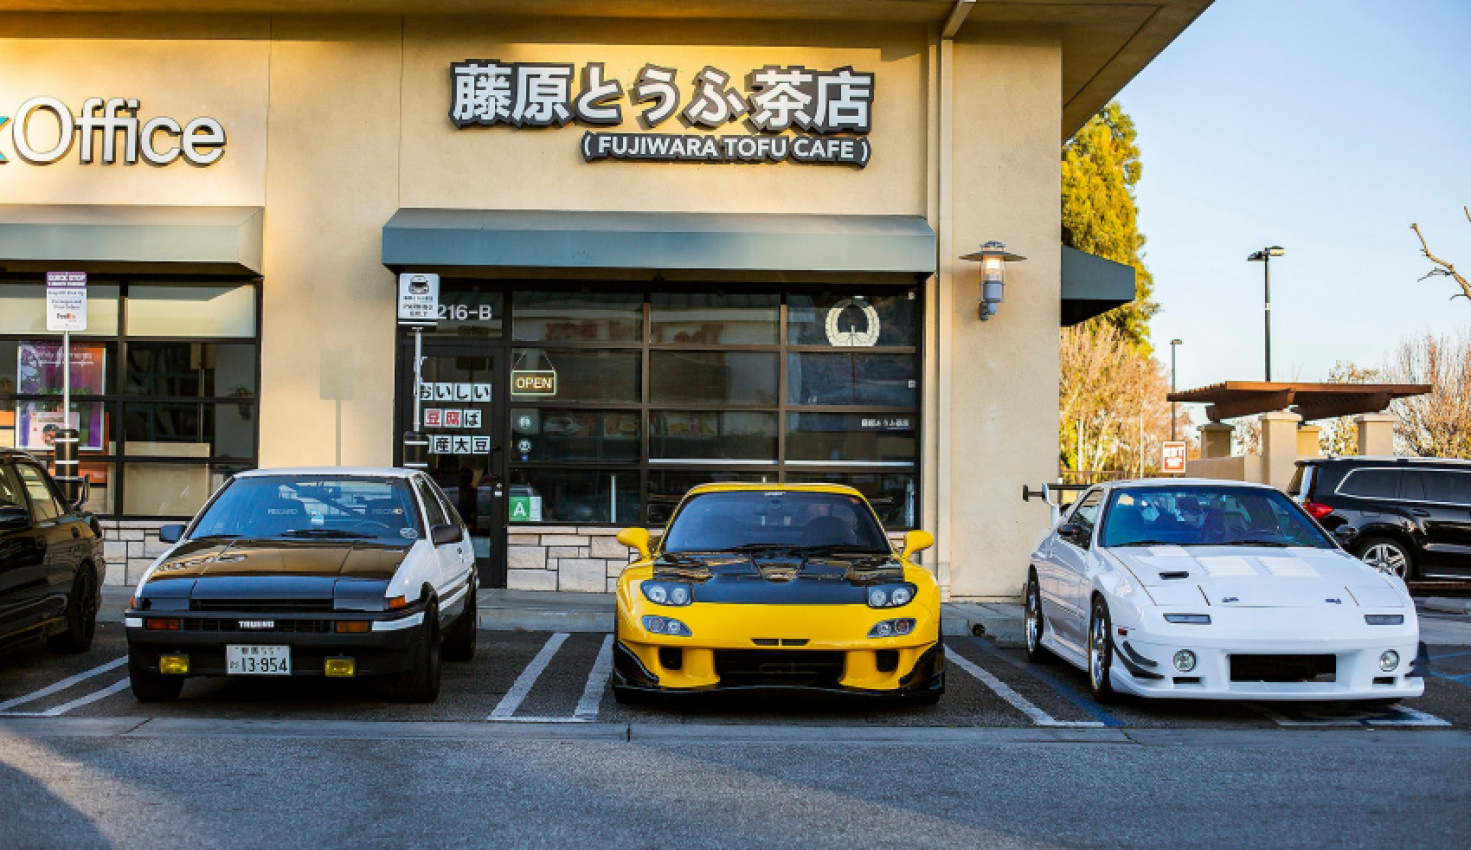 Socal's Initial D-Themed Café Is Every Bit as Cool as It Sounds